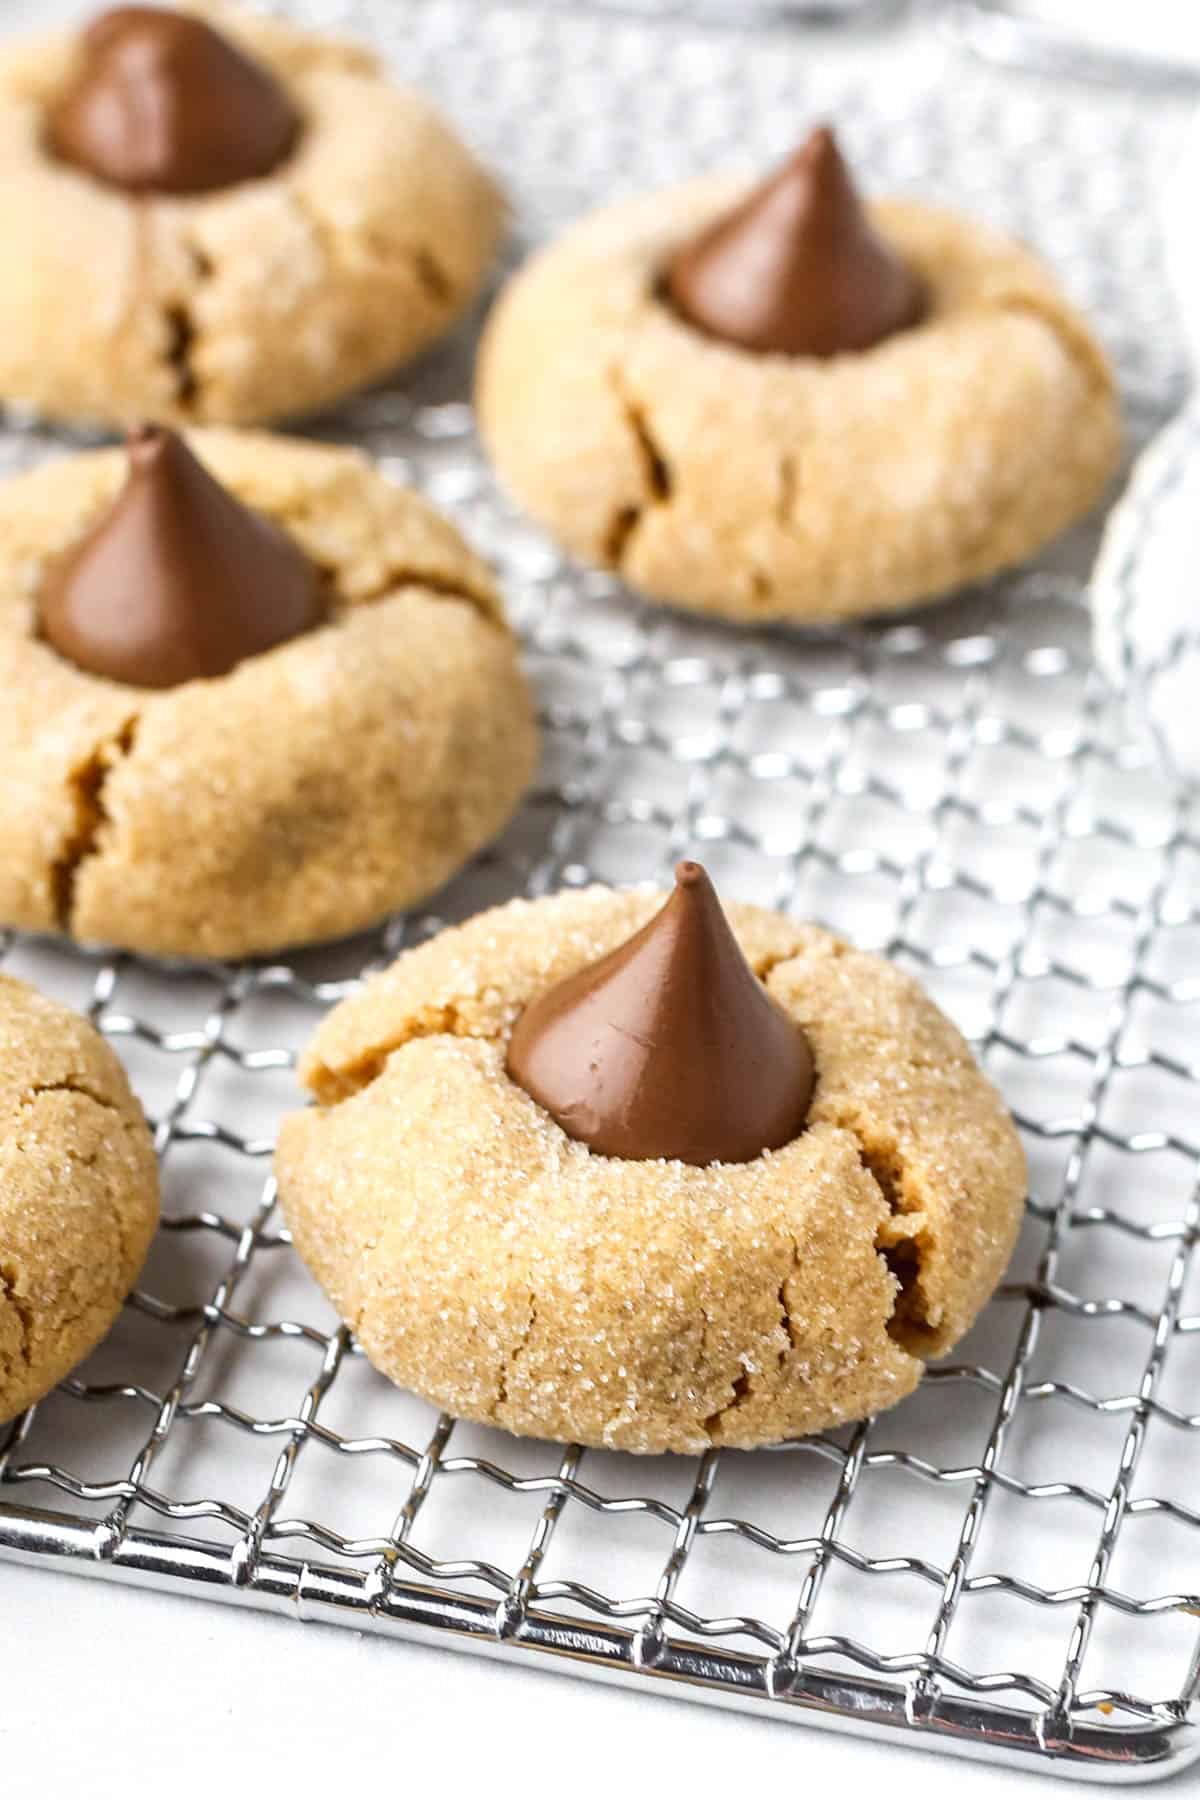 A peanut butter blossom cookie with a Hershey's kiss on top.